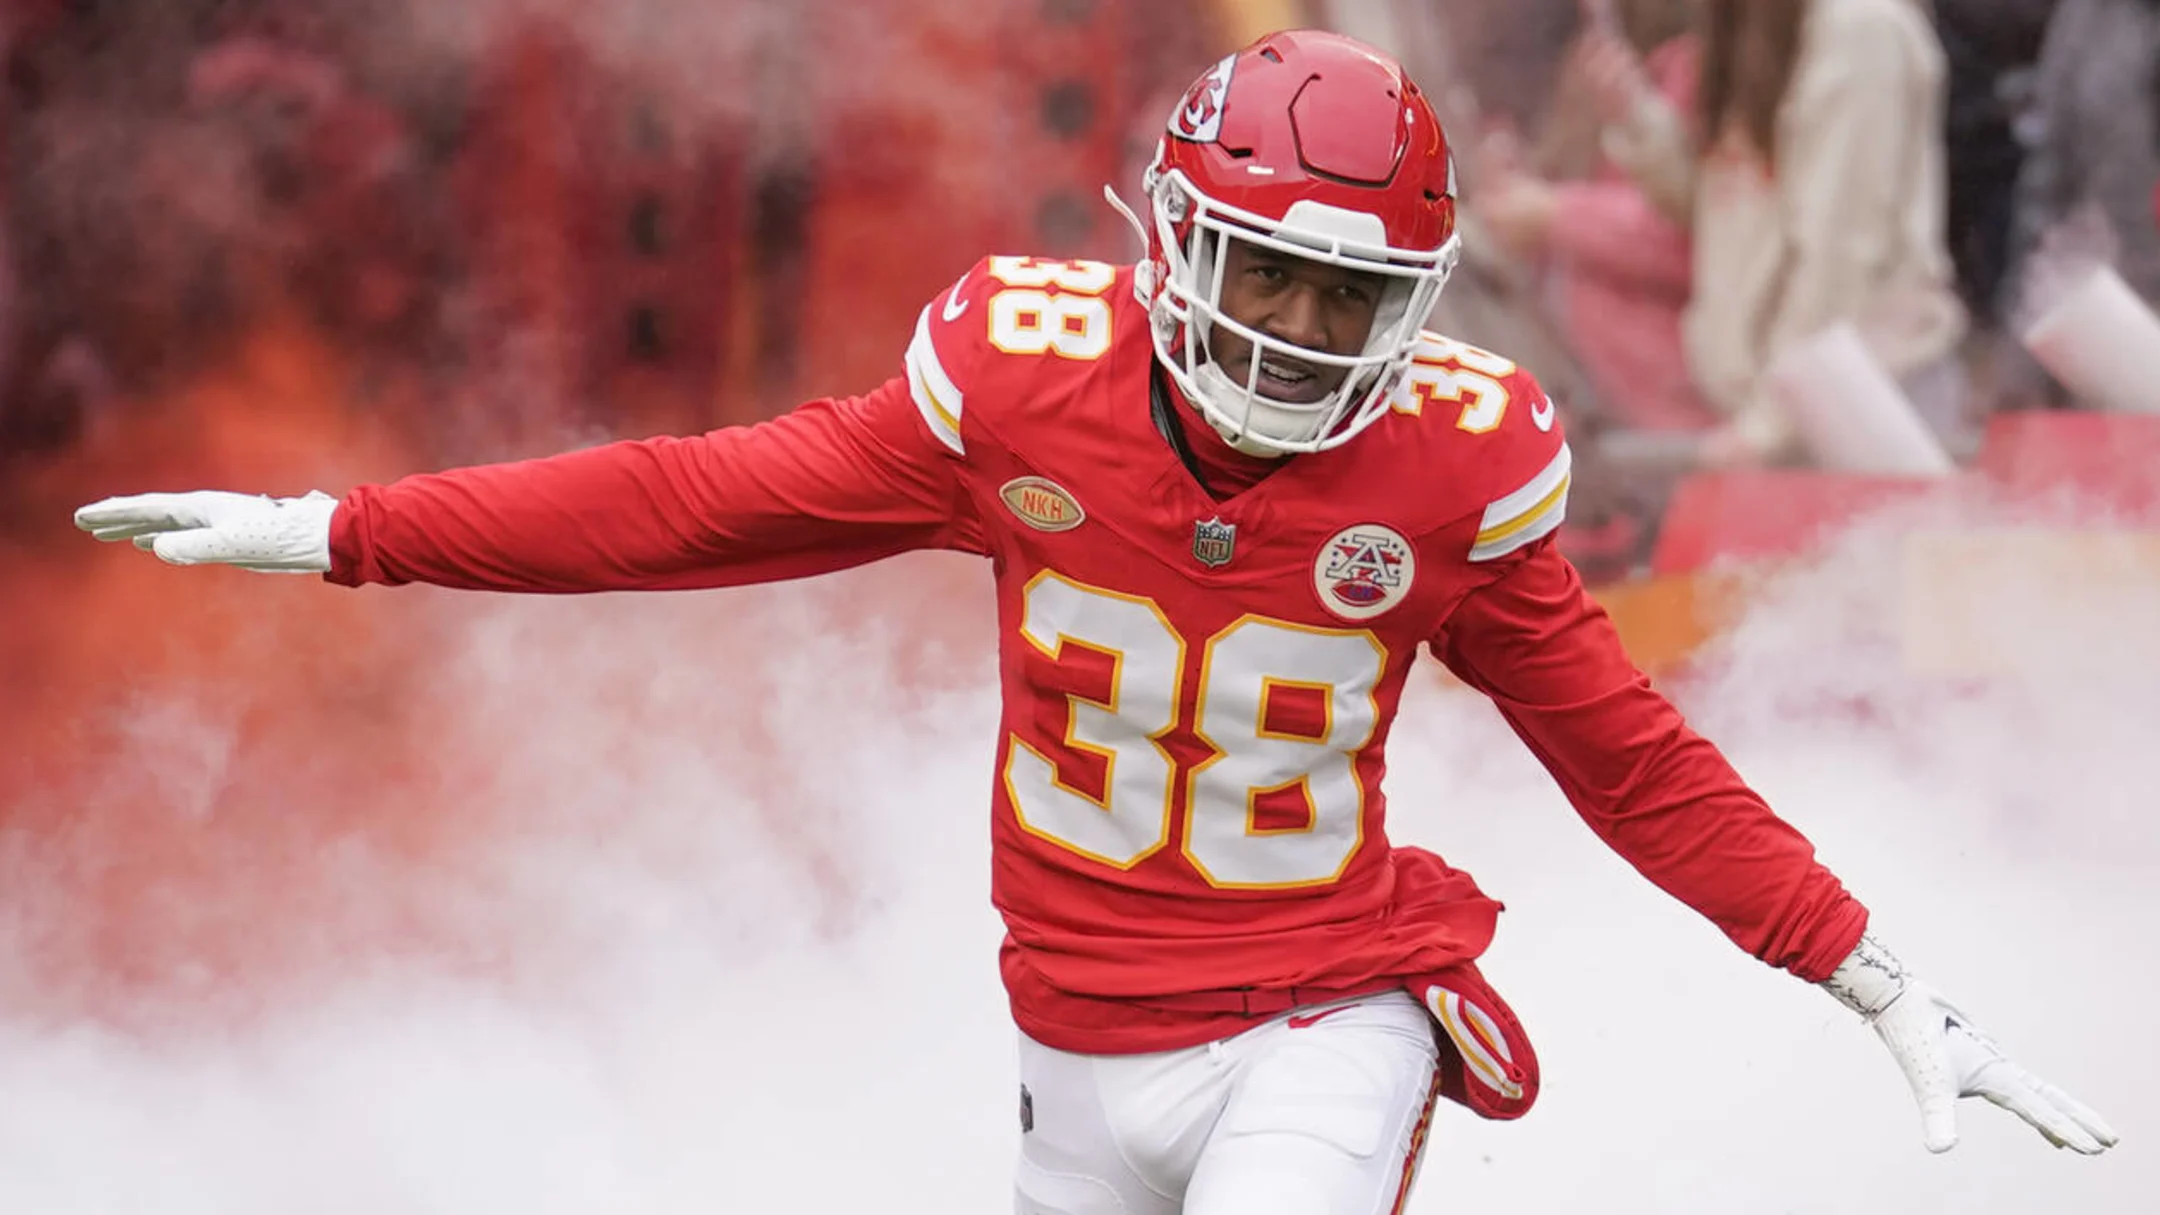 NFL Star L'Jarius Sneed Swaps Chiefs for Titans: Inside the Big Move and What It Means for Fans